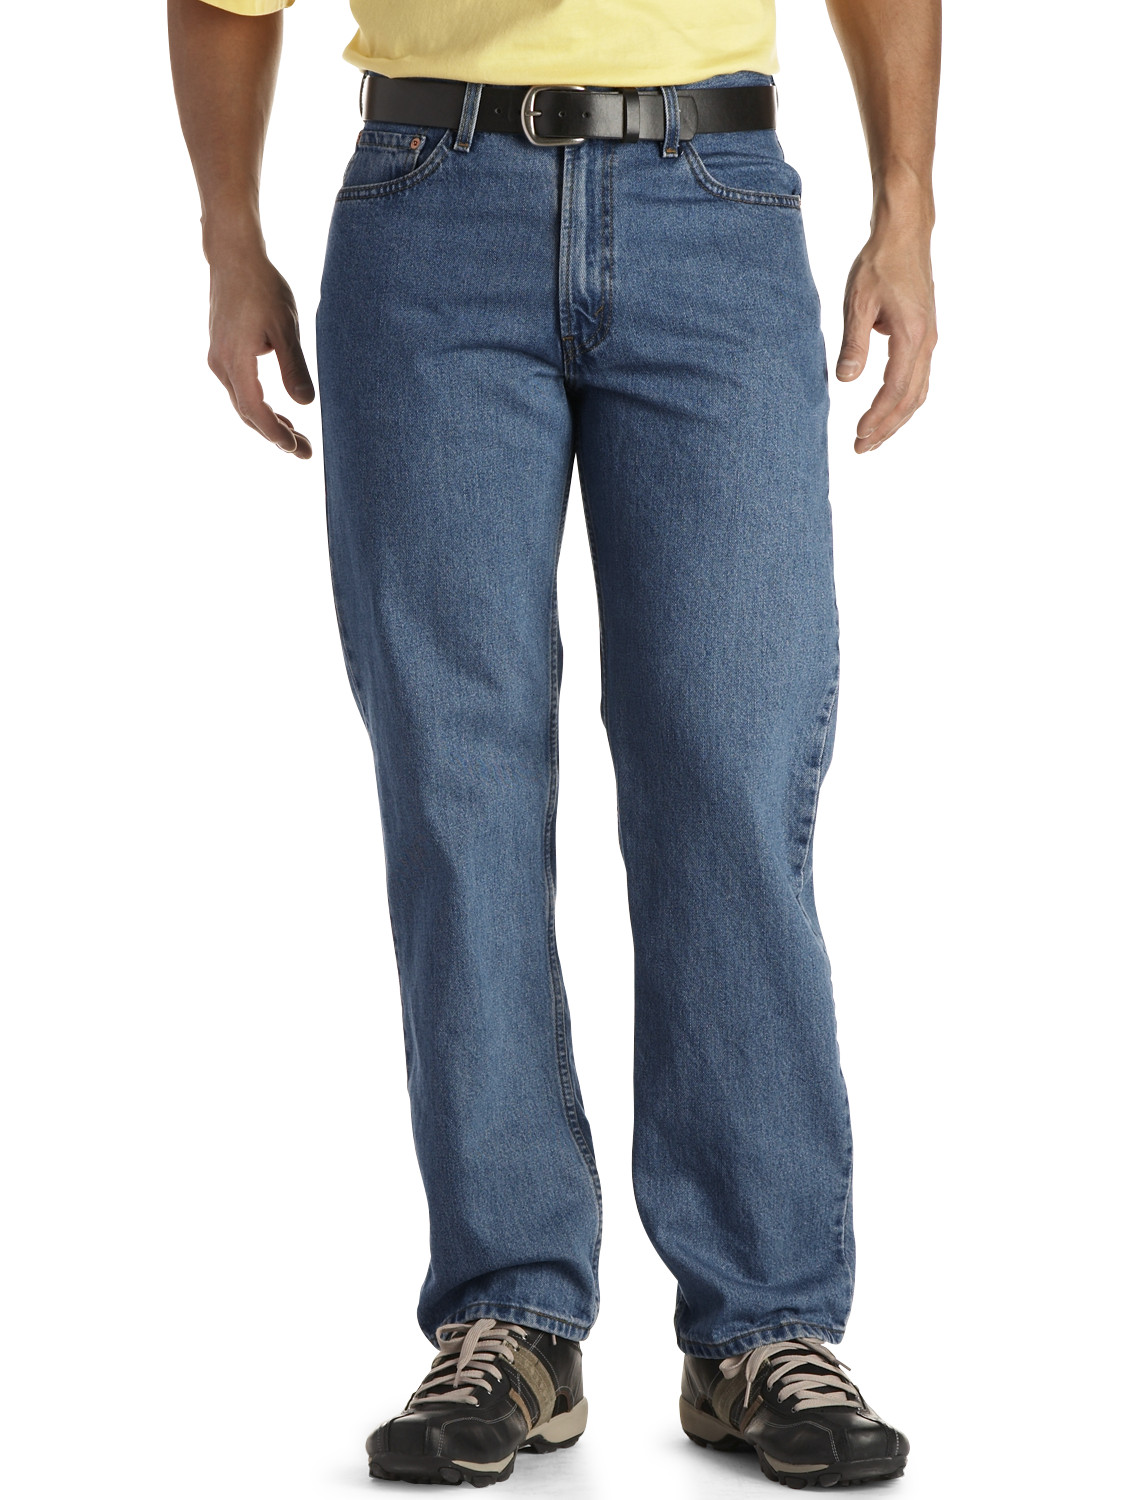 Big + Tall | Levi's 550 Relaxed-Fit Jeans | DXL